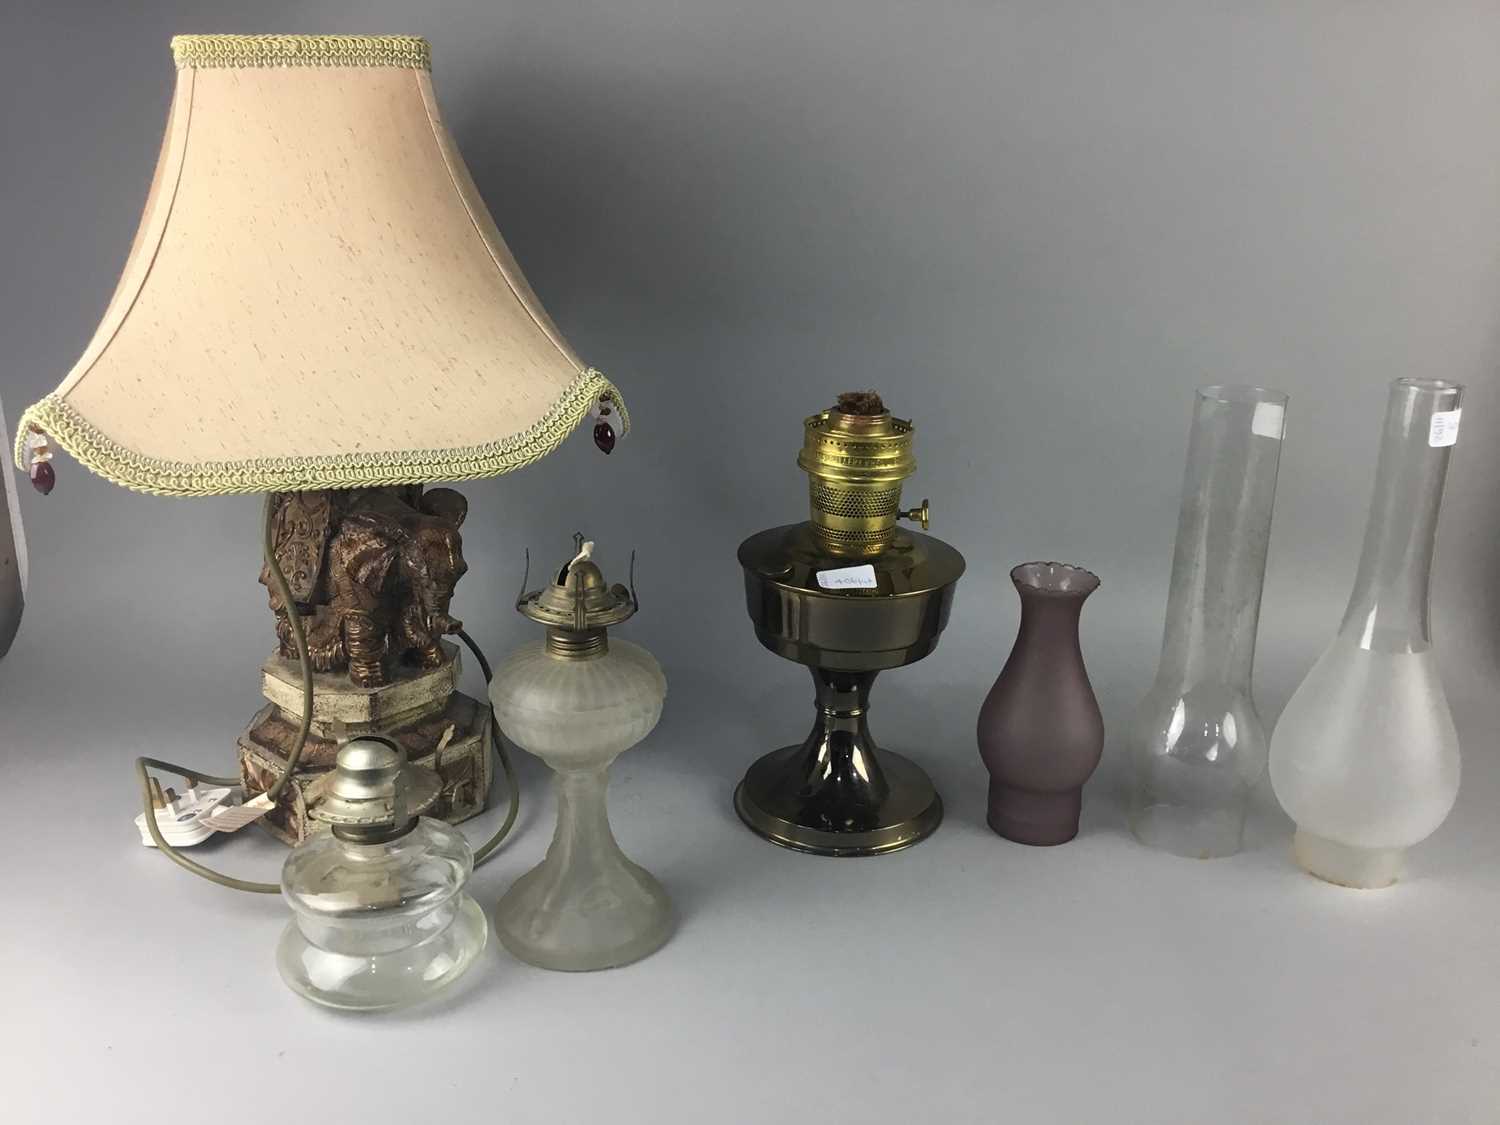 Lot 406 - A TABLE LAMP ALONG WITH AN OIL LAMP AND OIL LAMP PARTS